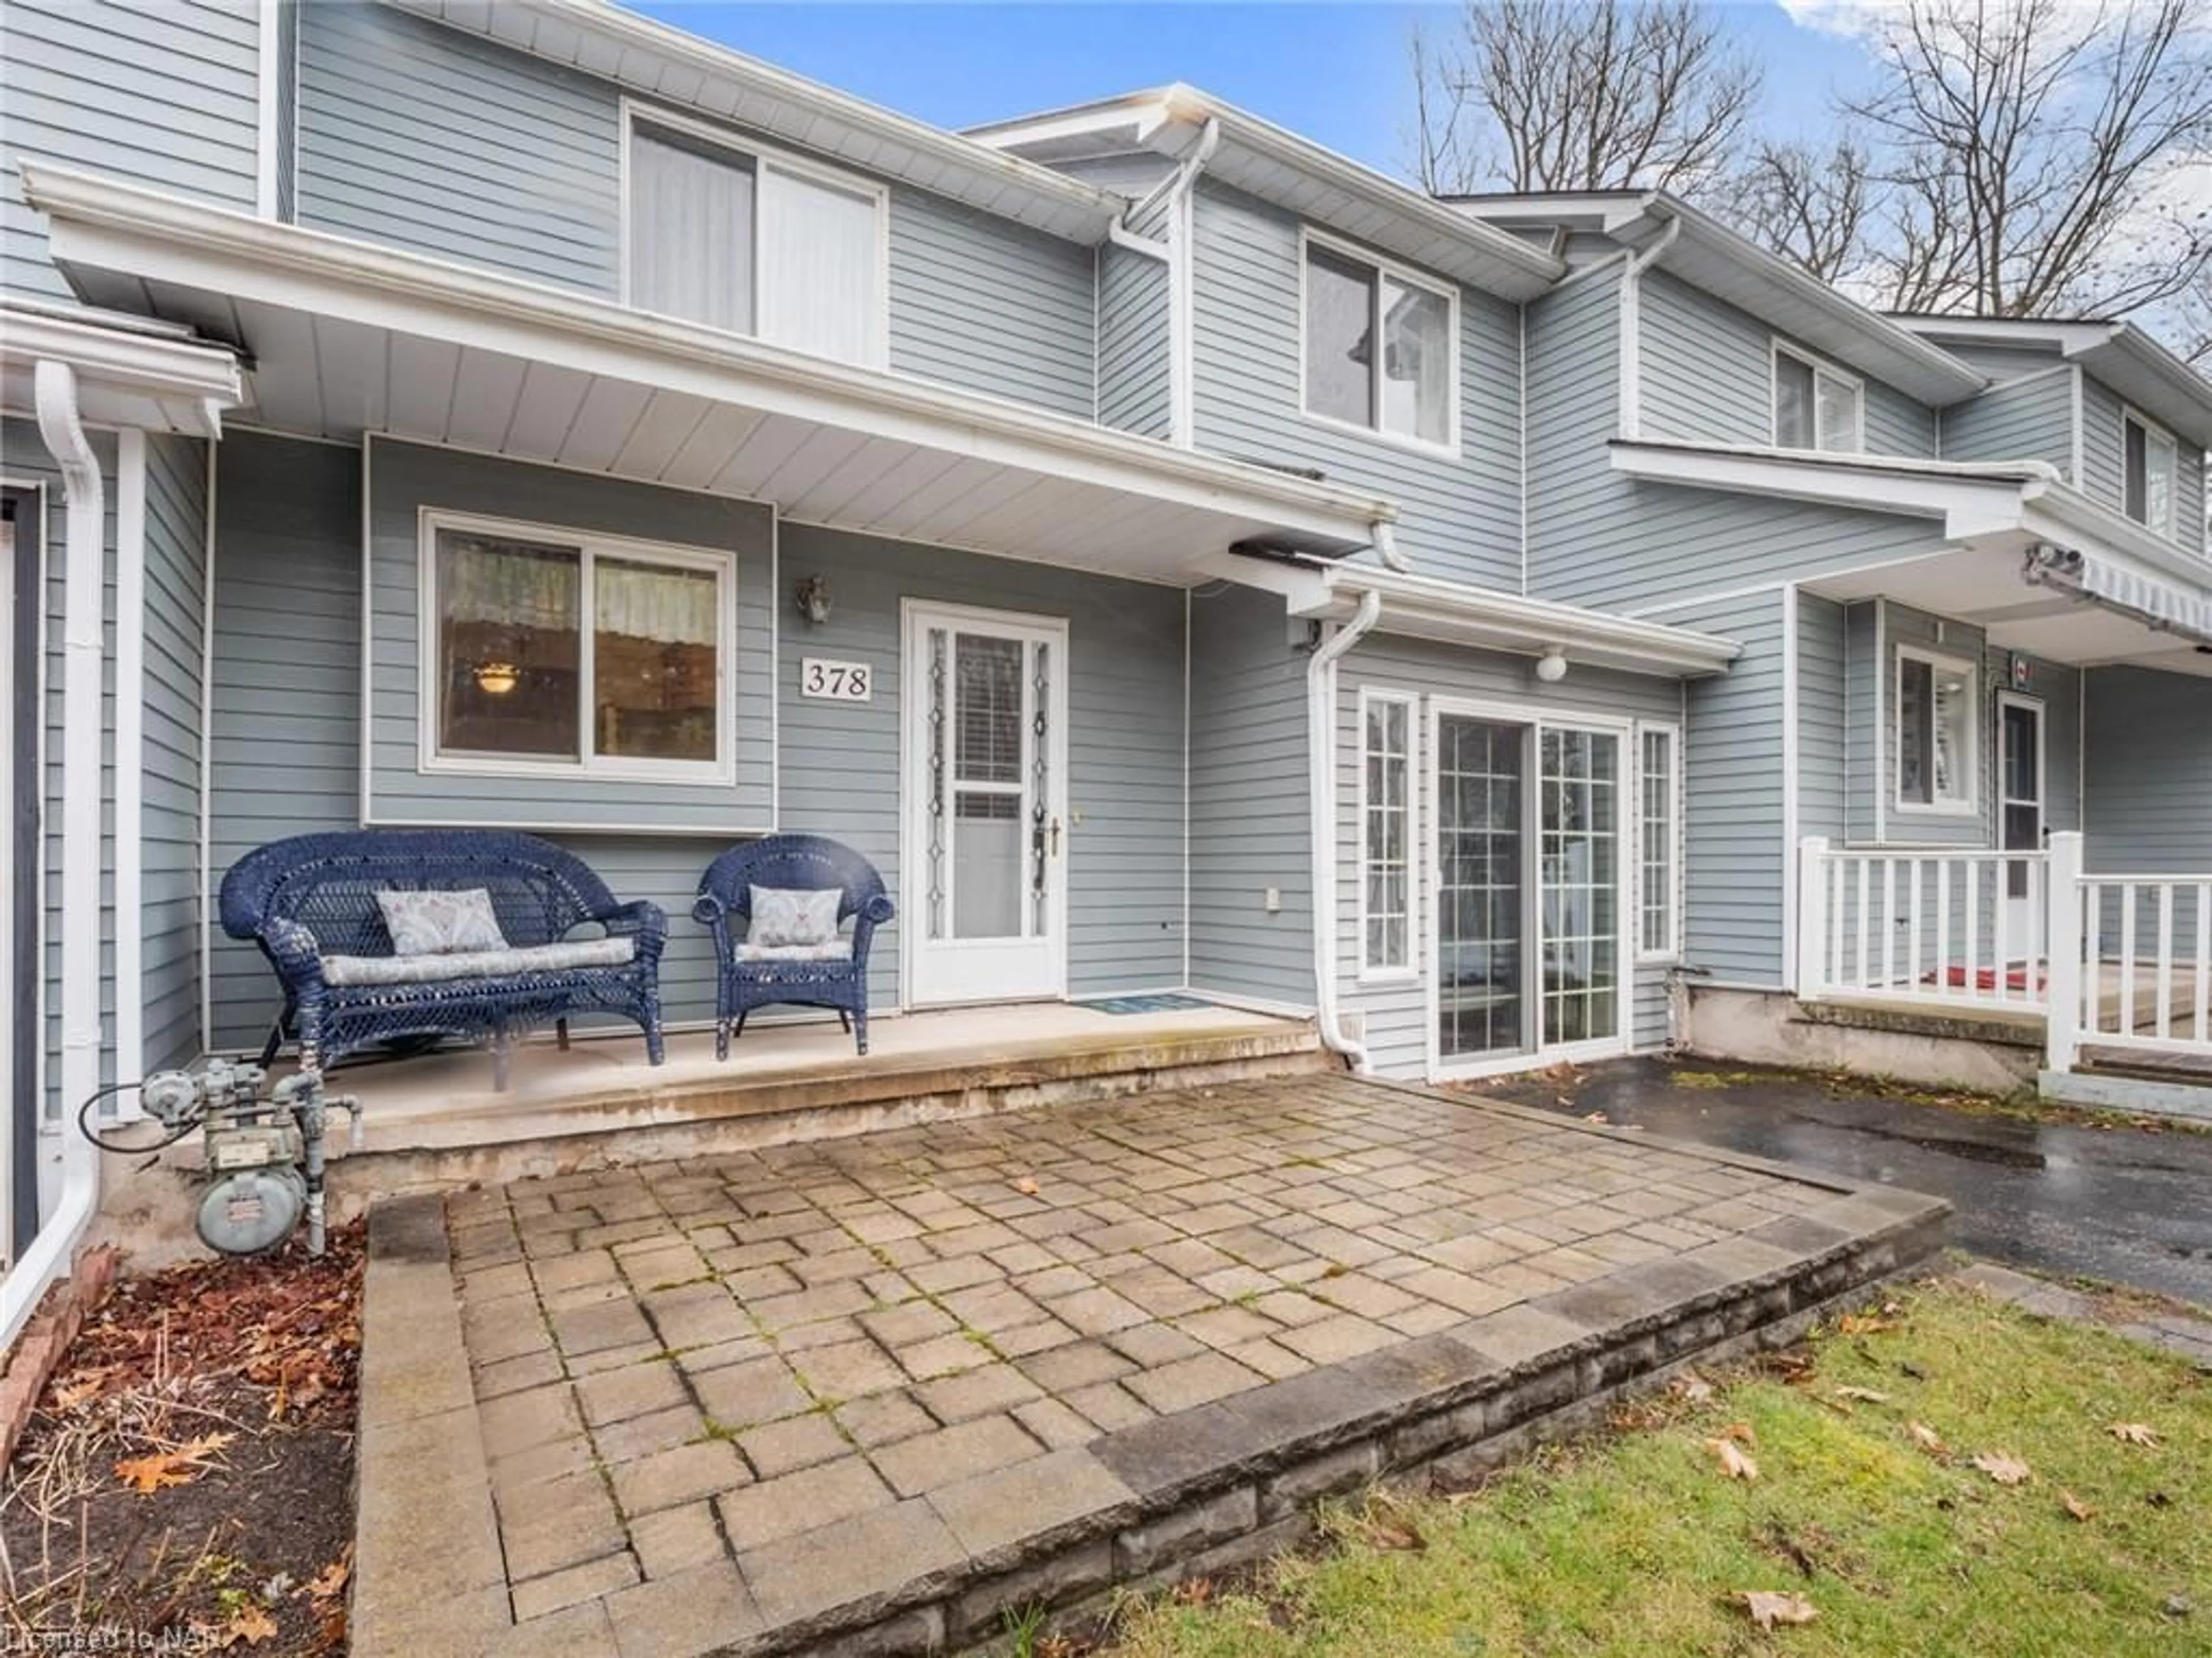 Patio for 378 Willowood Ave, Crystal Beach Ontario L0S 1B0